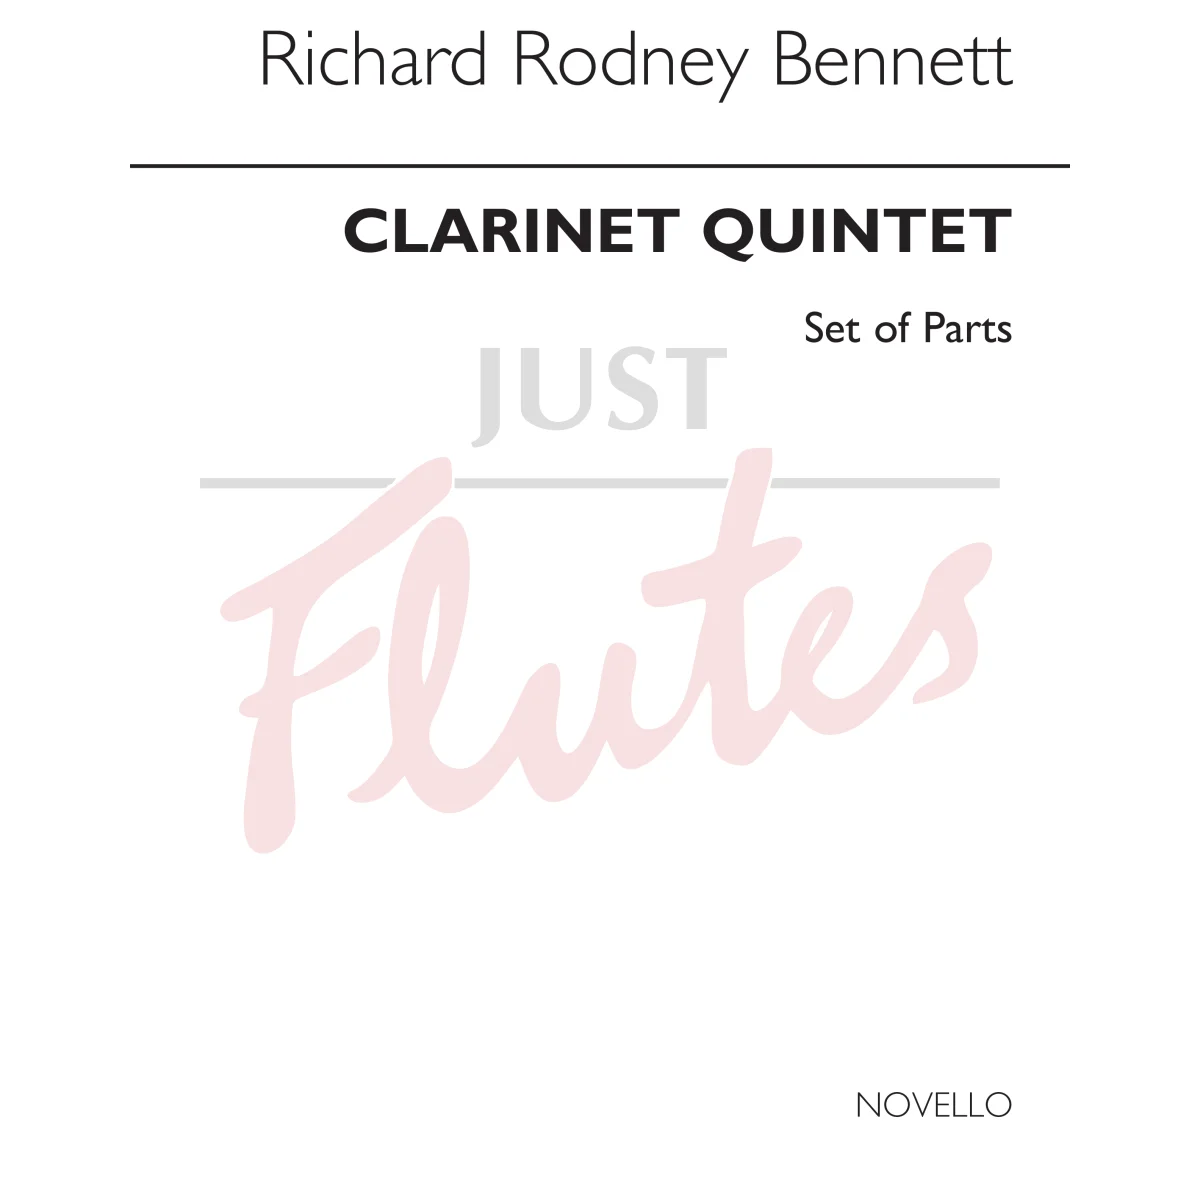 Clarinet Quintet for Five Clarinets